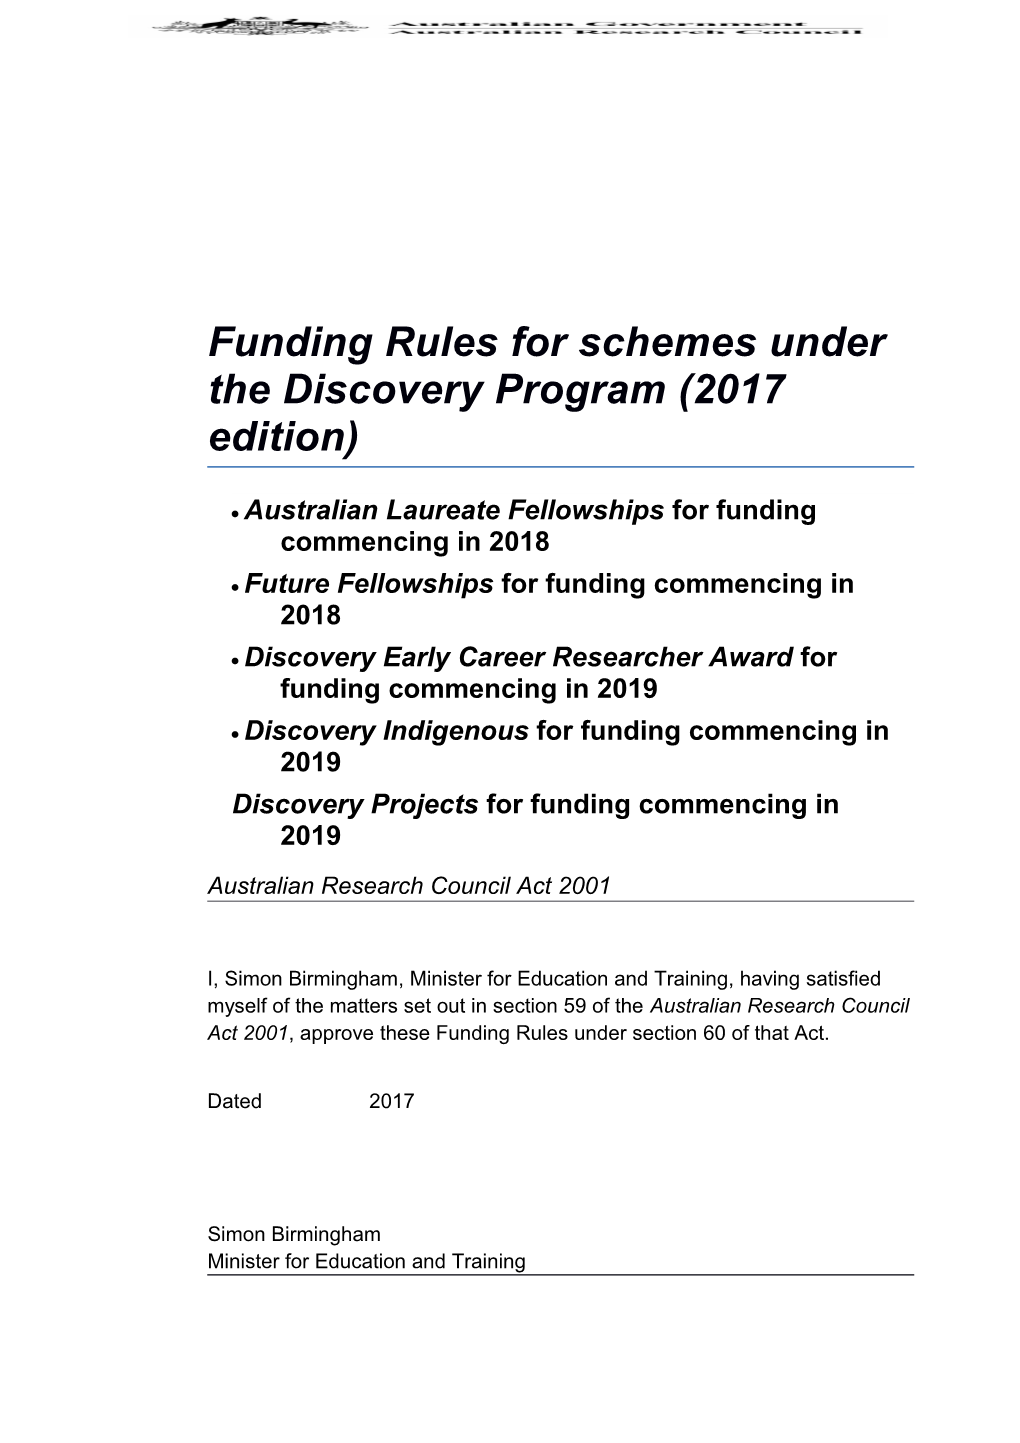 Funding Rules for Schemes Under the Discovery Program (2017 Edition)